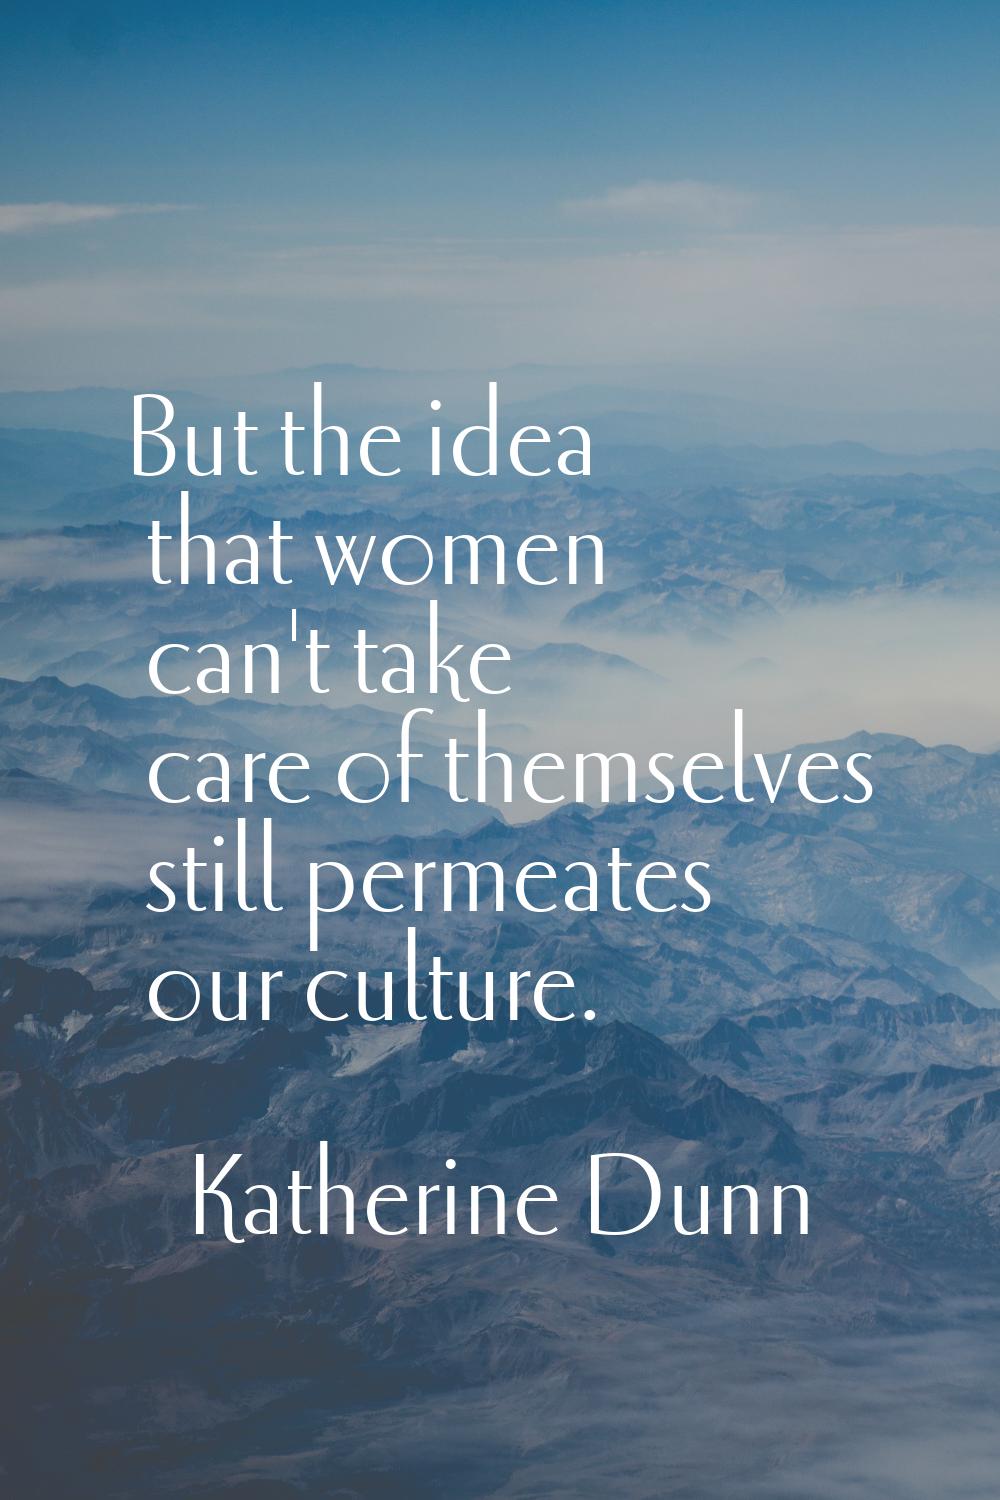 But the idea that women can't take care of themselves still permeates our culture.